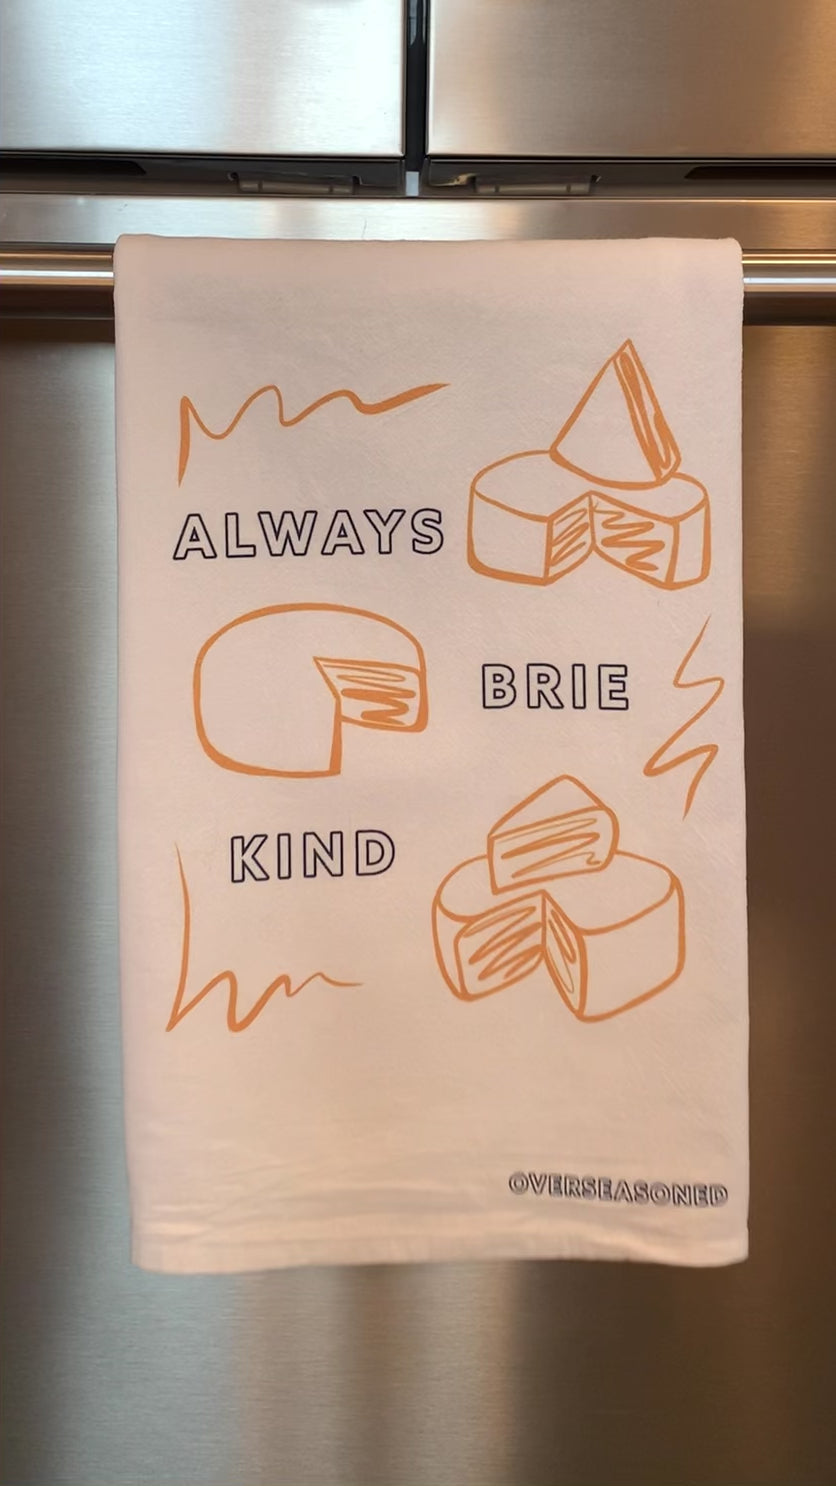 A tea towel hanging on a bar reads "Always Brie Kind"